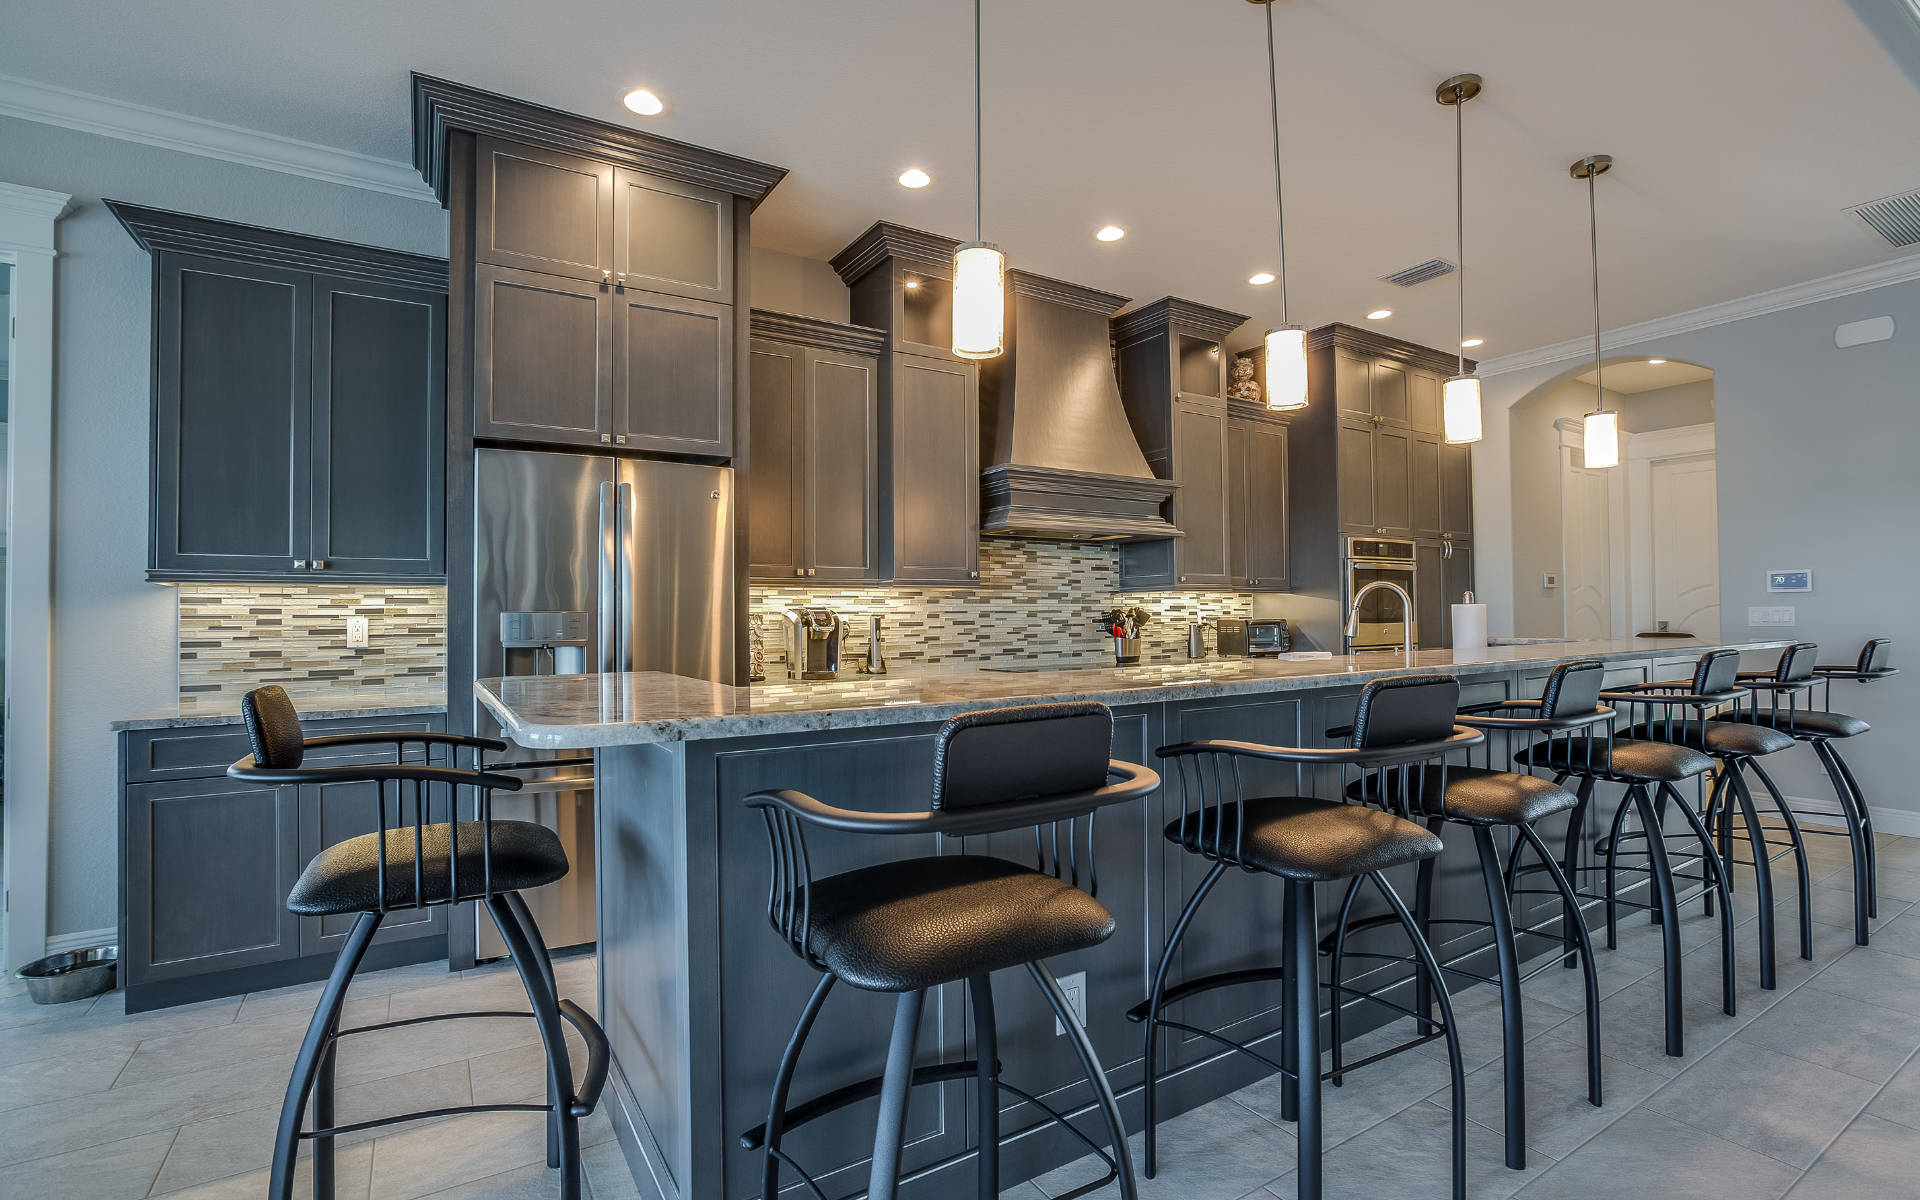 Luxury kitchen style with gray shaker cabinets